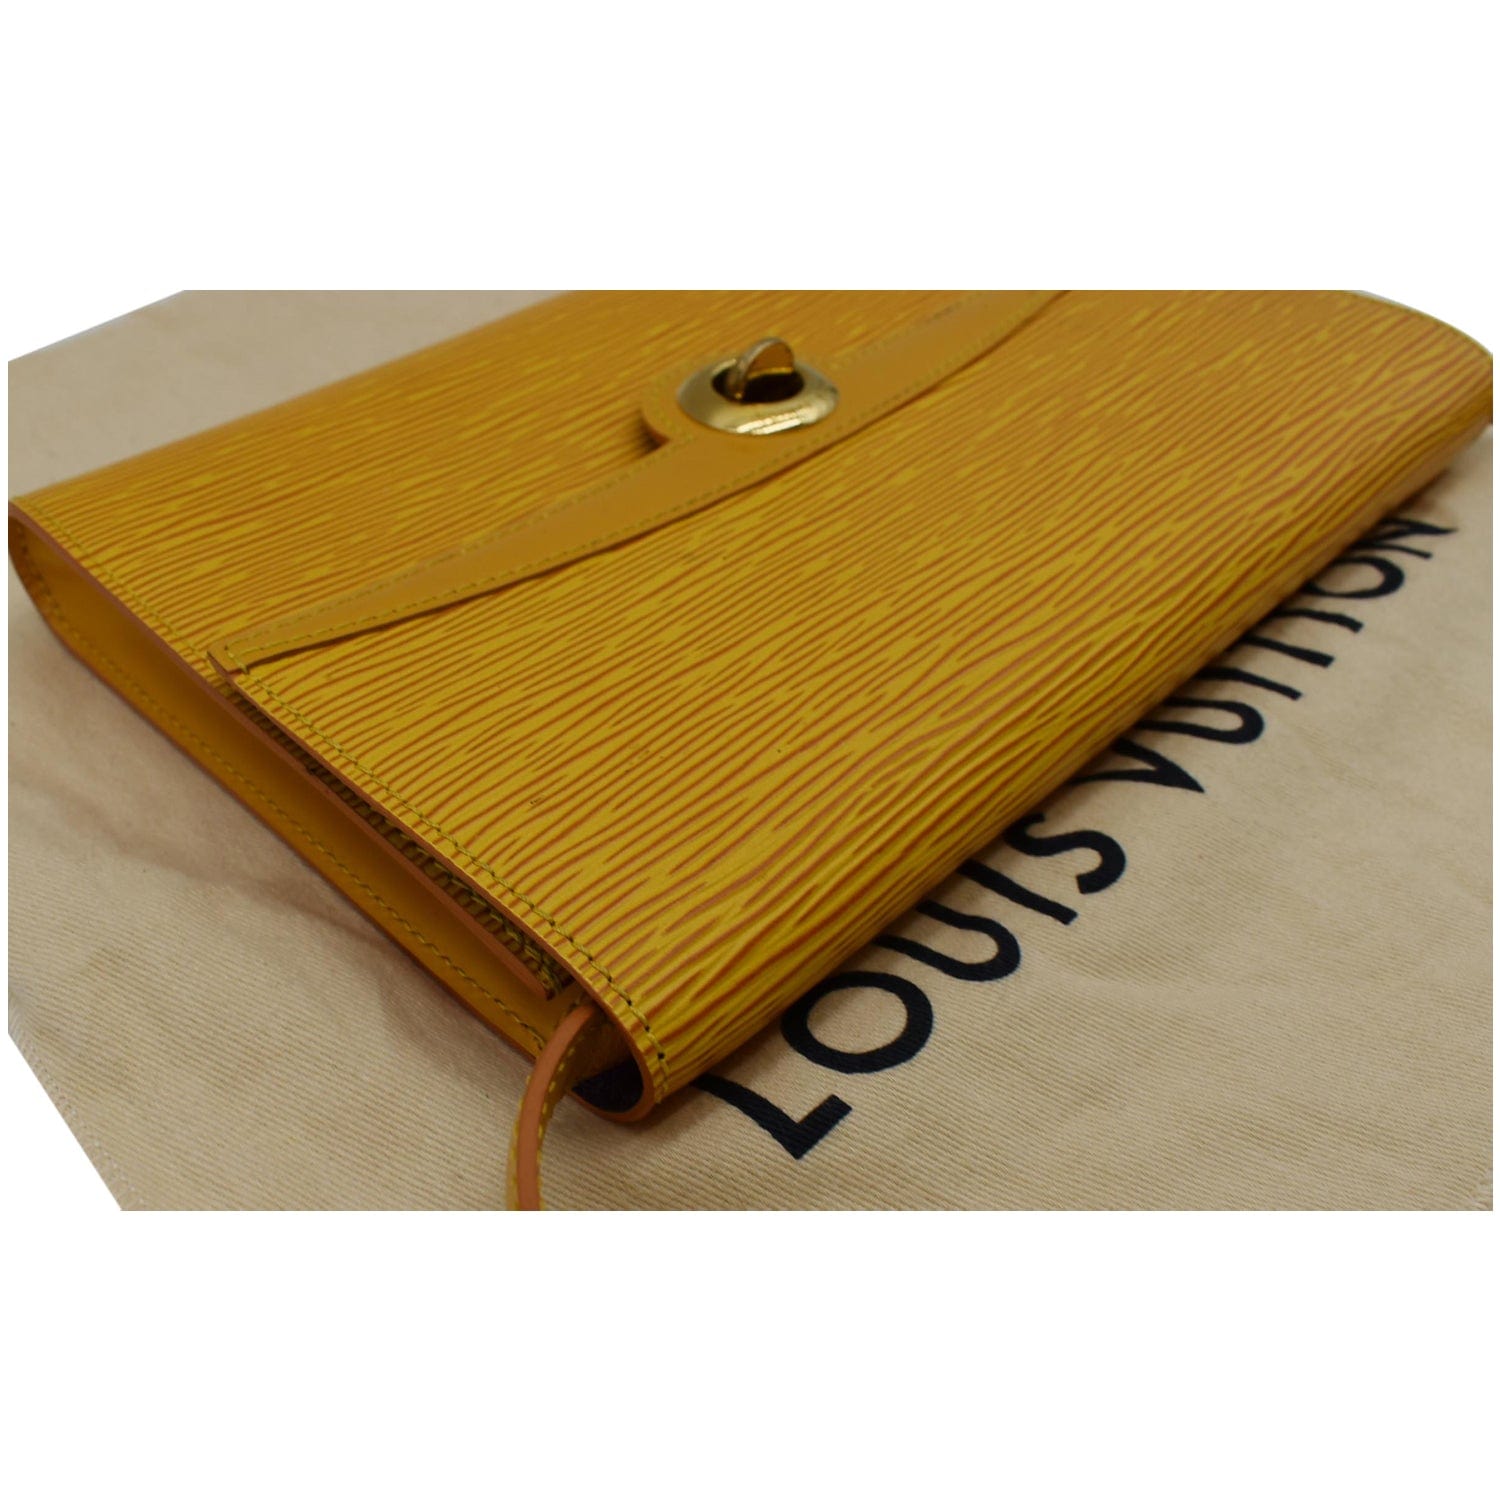 LOUIS VUITTON long wallet in yellow epi leather